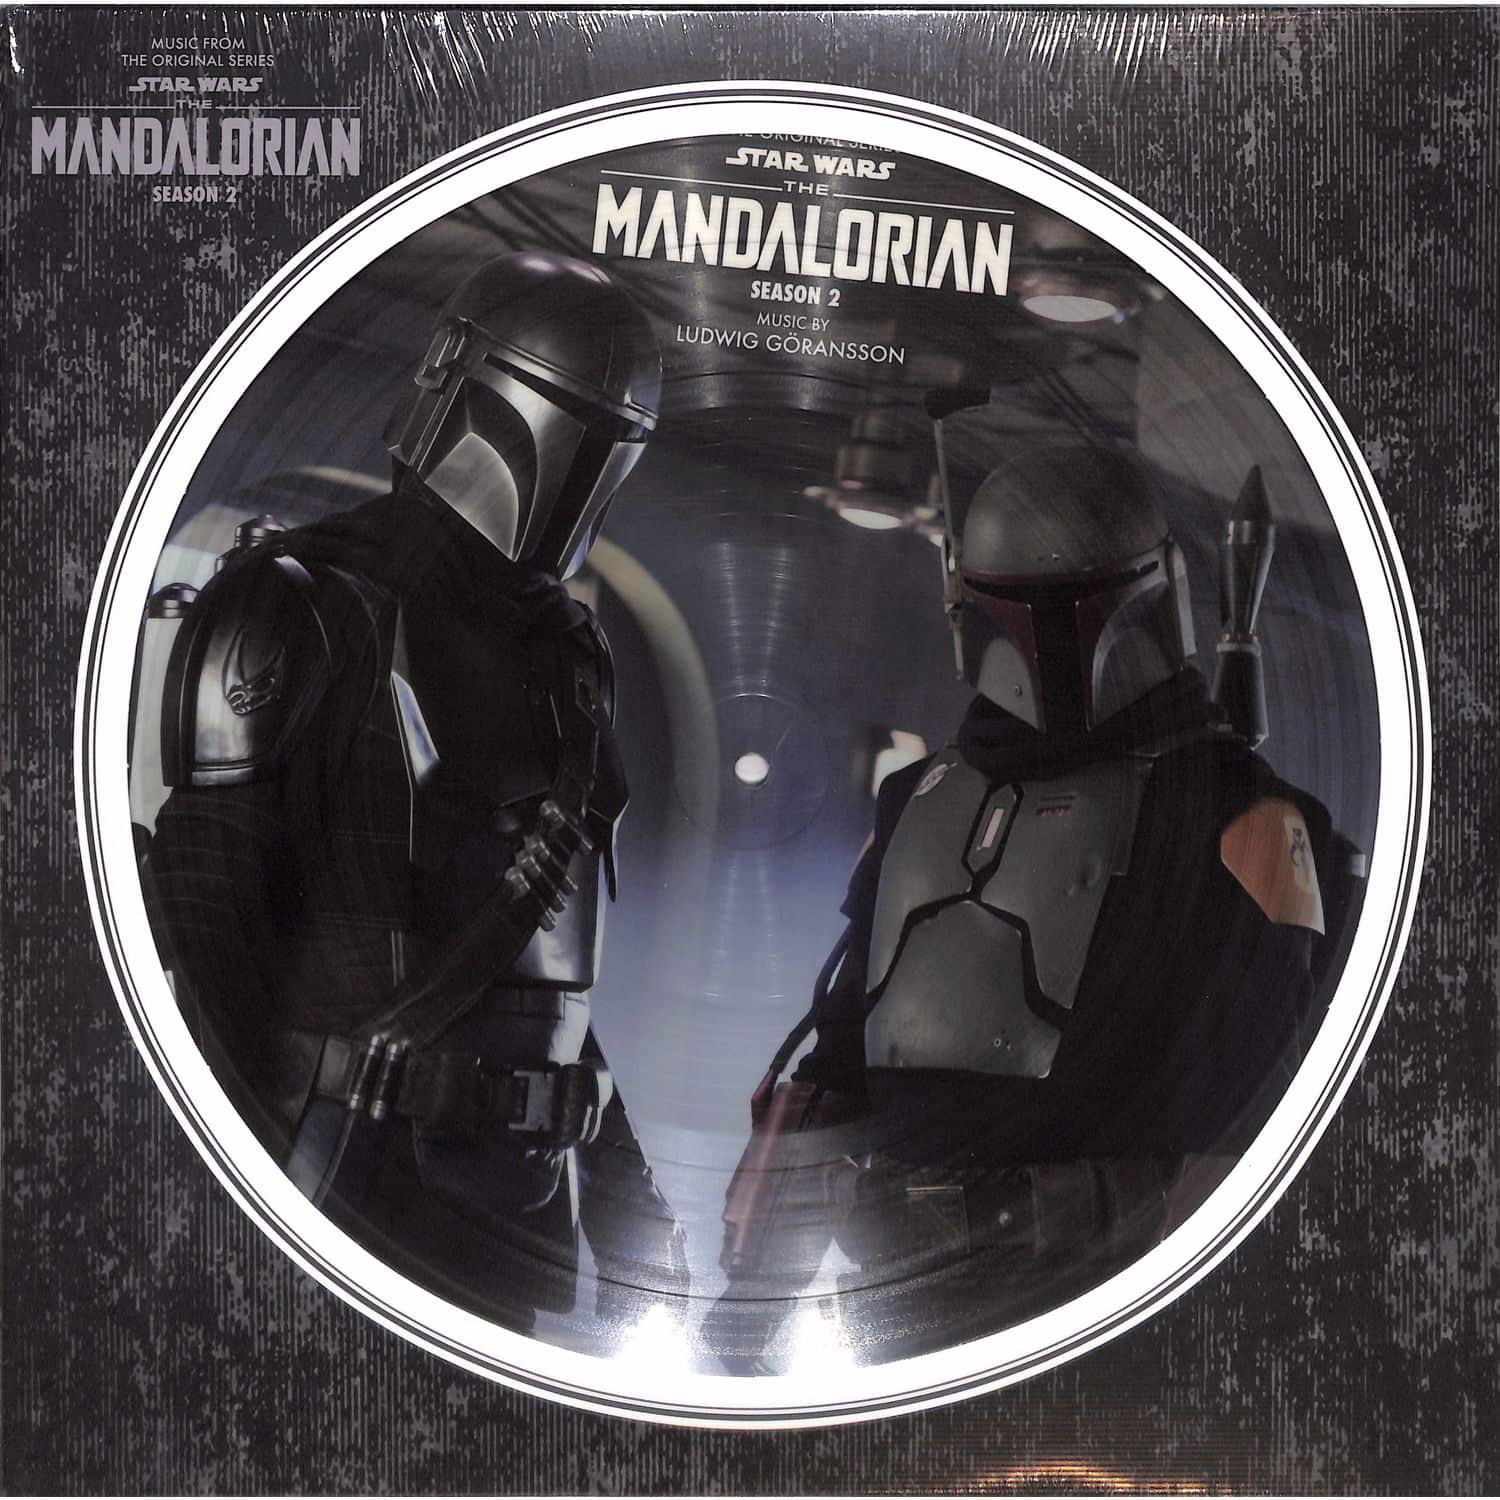 OST / Ludwig Gransson - MUSIC FROM THE MANDALORIAN: SEASON 2, PICTURE DISC 